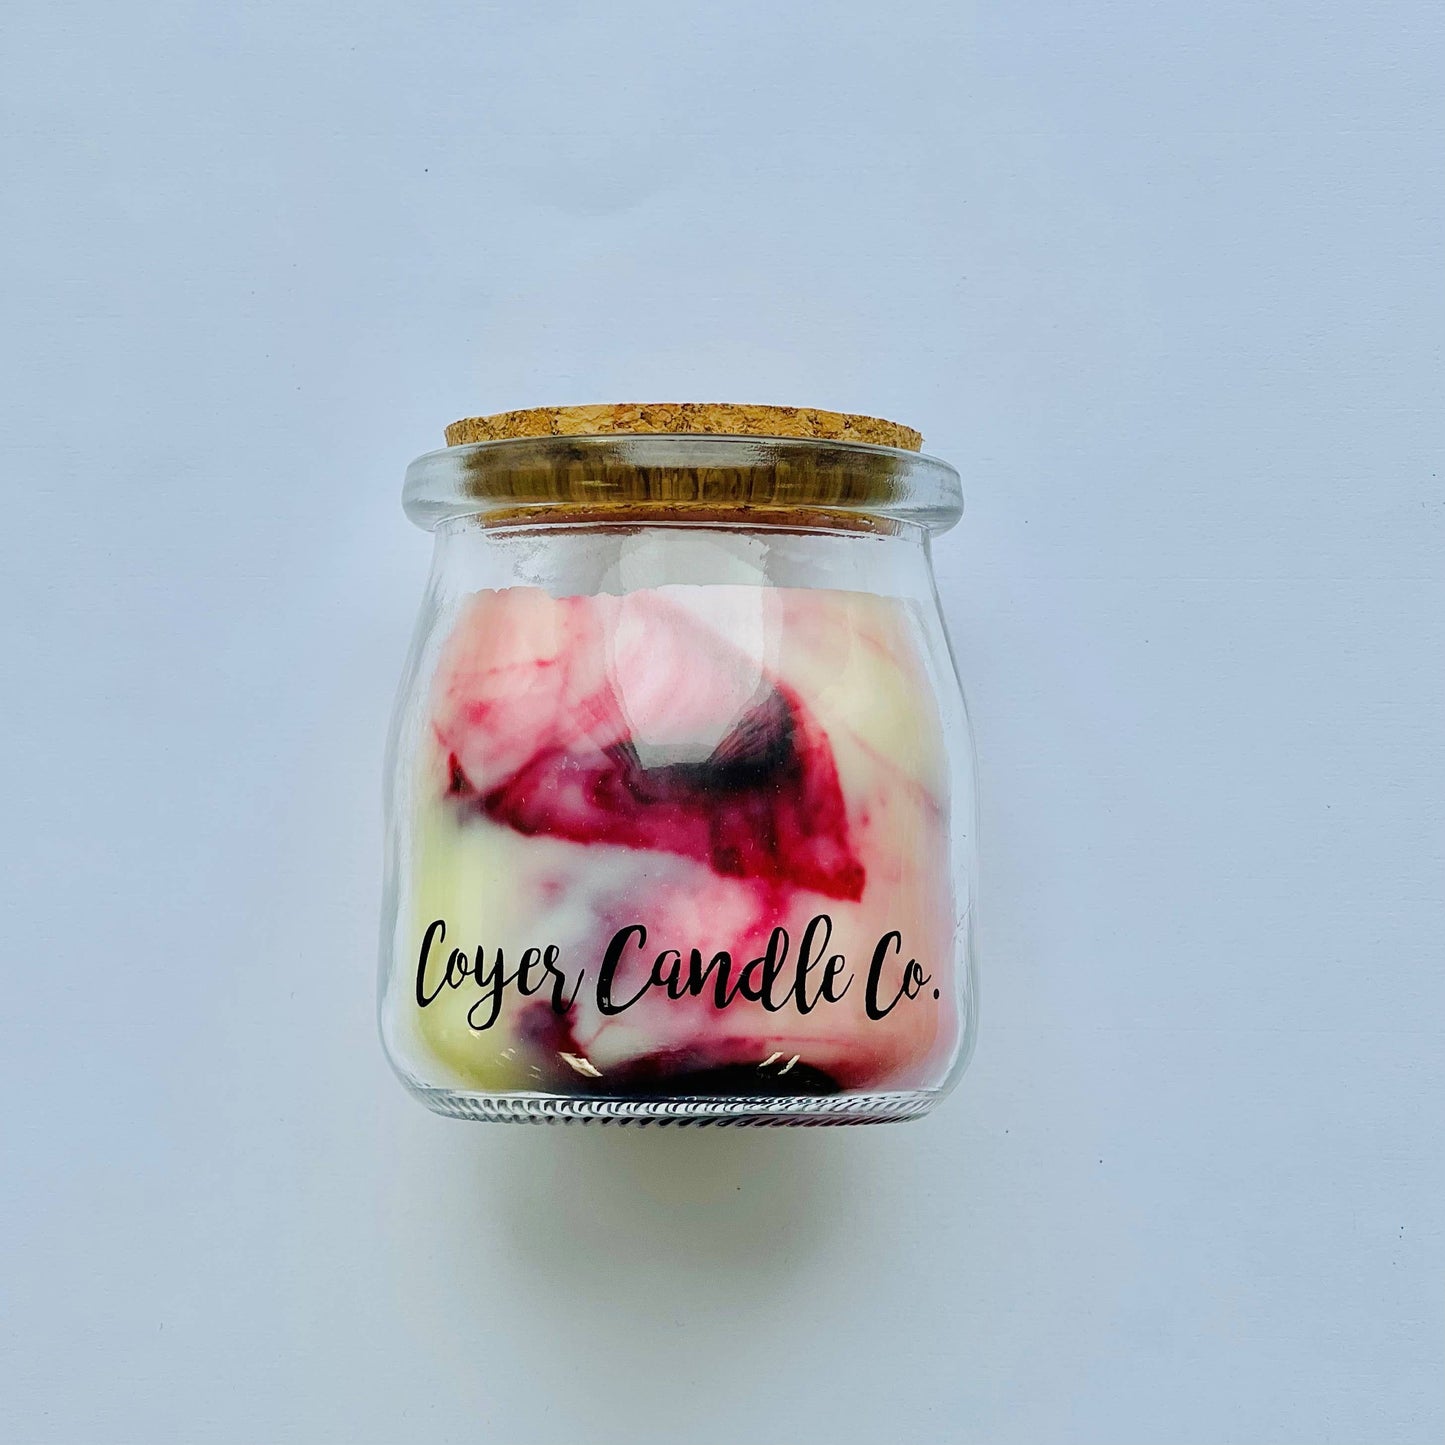 Coyer Candle Co. - 5 oz. Studio Jar Candle - Winter & Christmas Collection: Tropical State of Mind / Swirled Dye